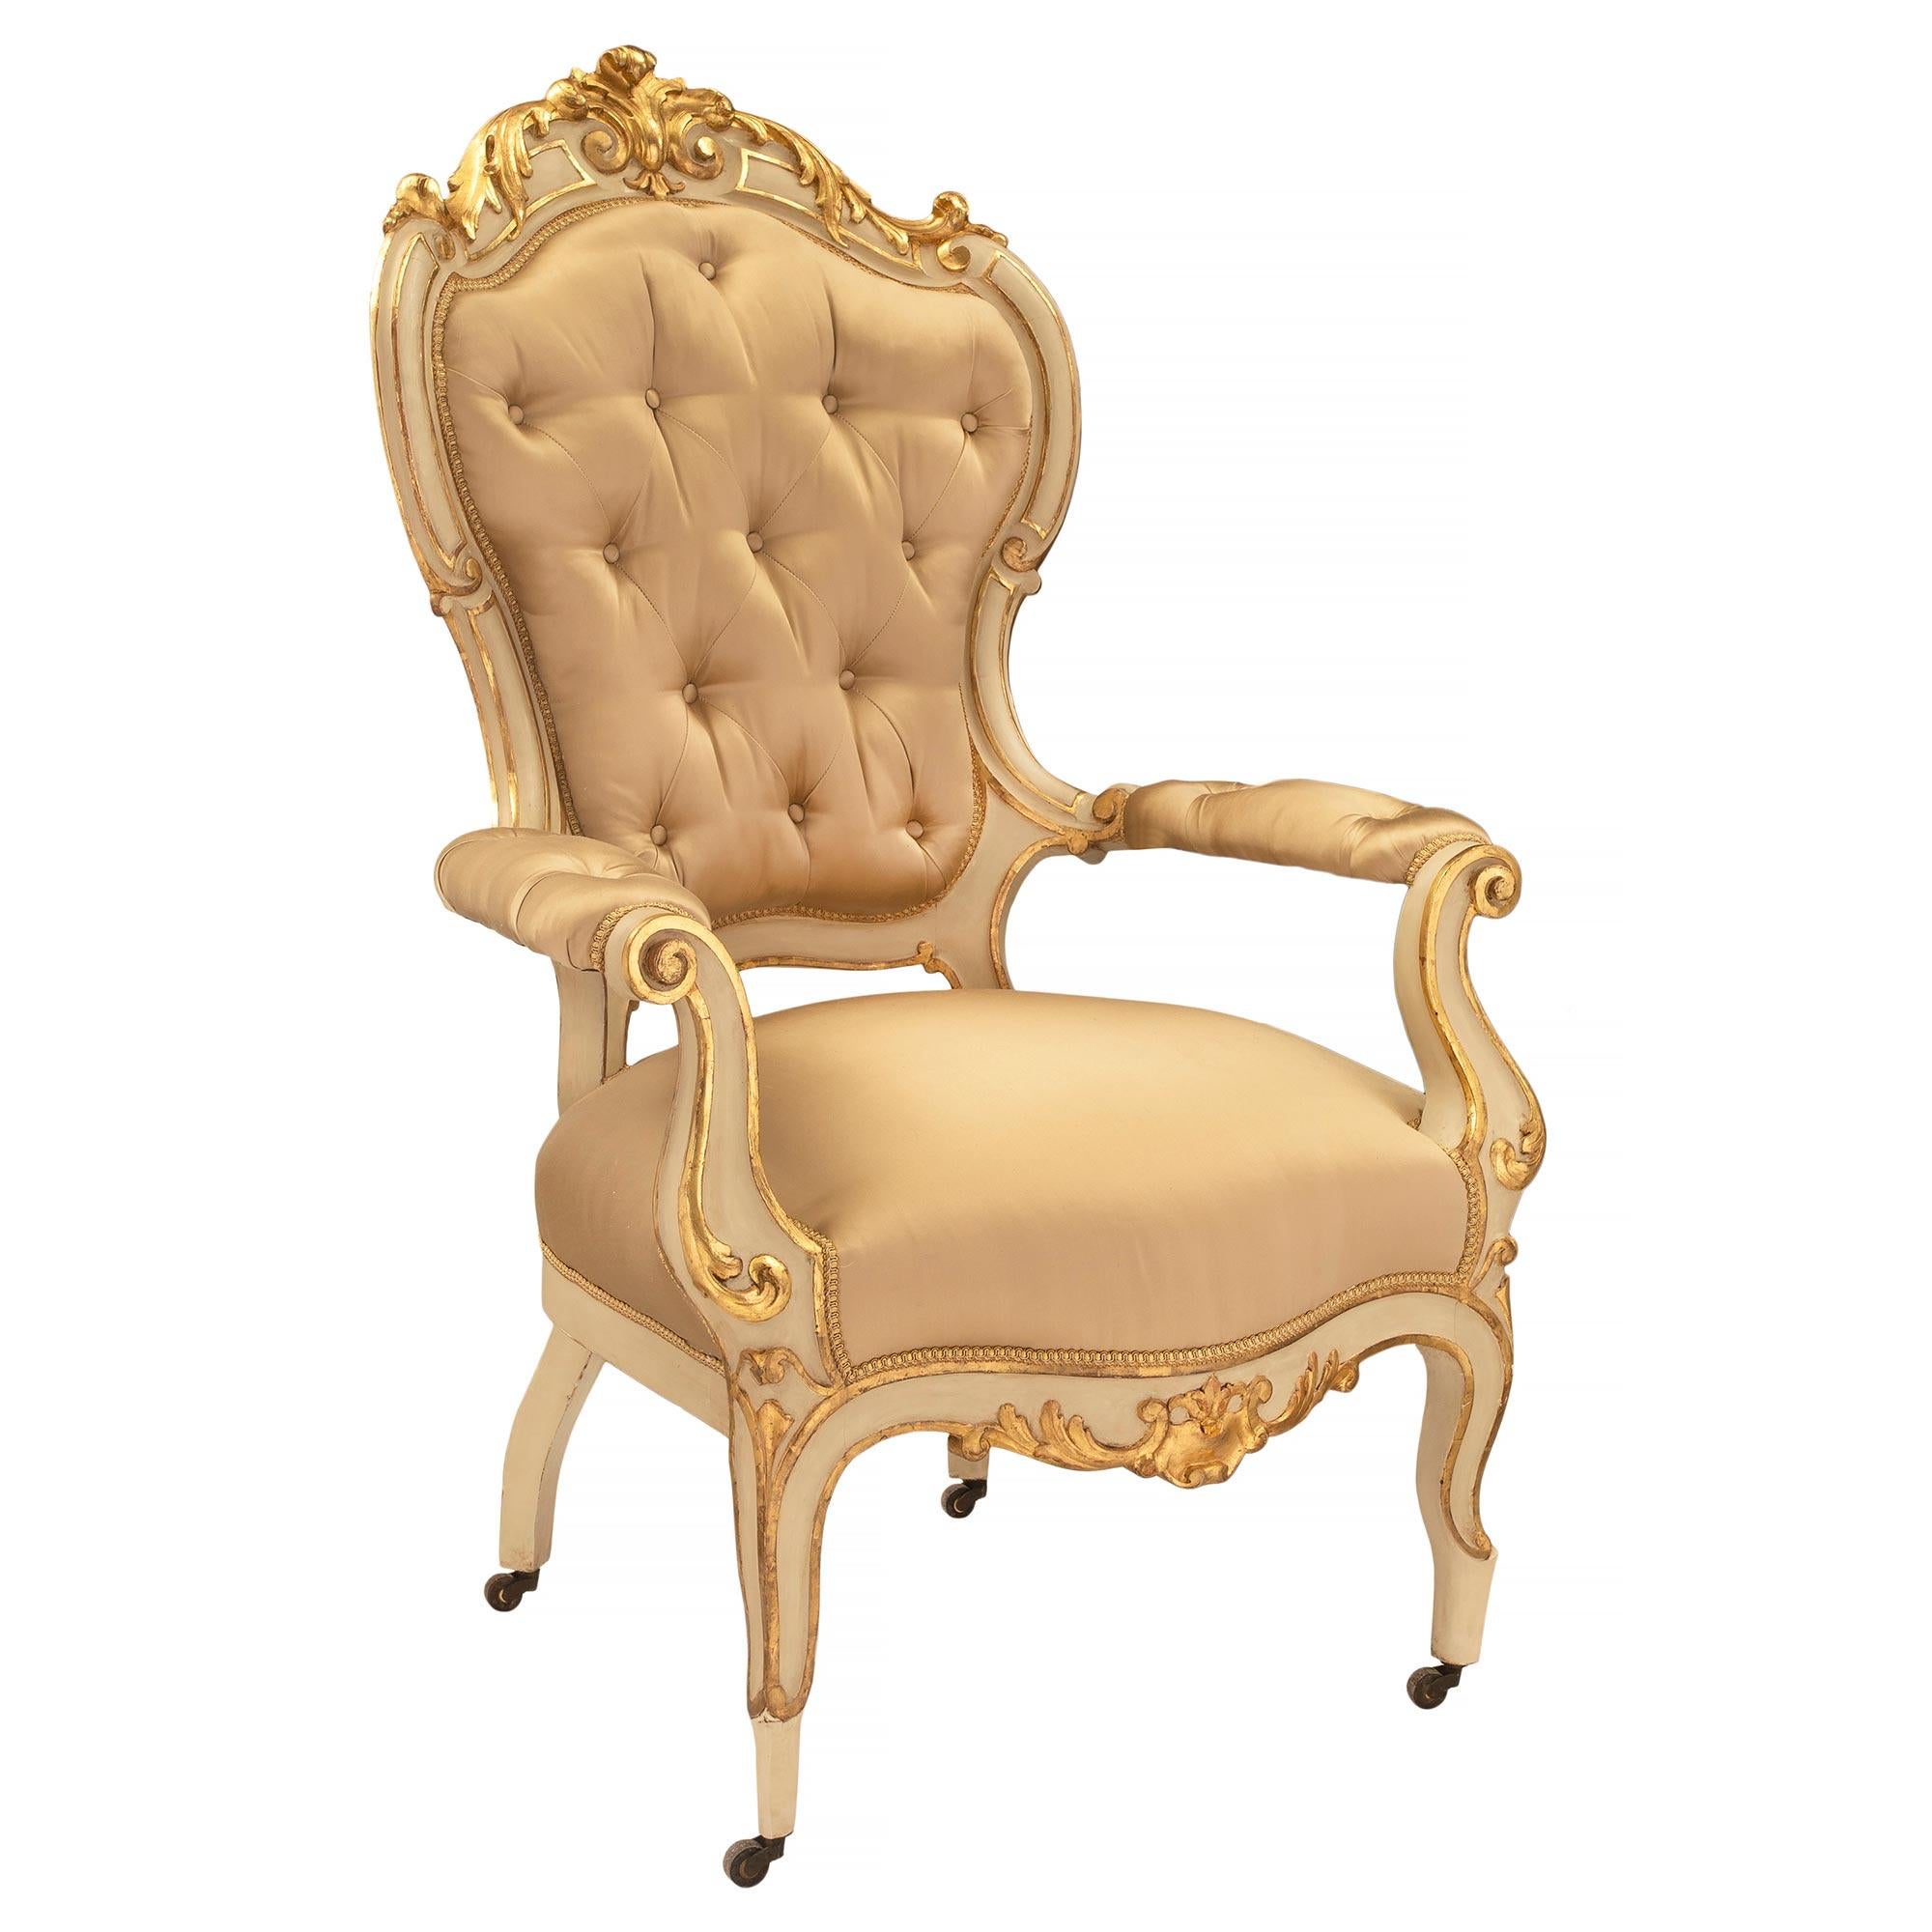 A unique and most decorative pair of Italian 19th century Louis XV st. patinated and giltwood armchairs. Each armchair is raised by their original caster and elegant patinated cabriole legs with fine giltwood fillets which extend up each leg and